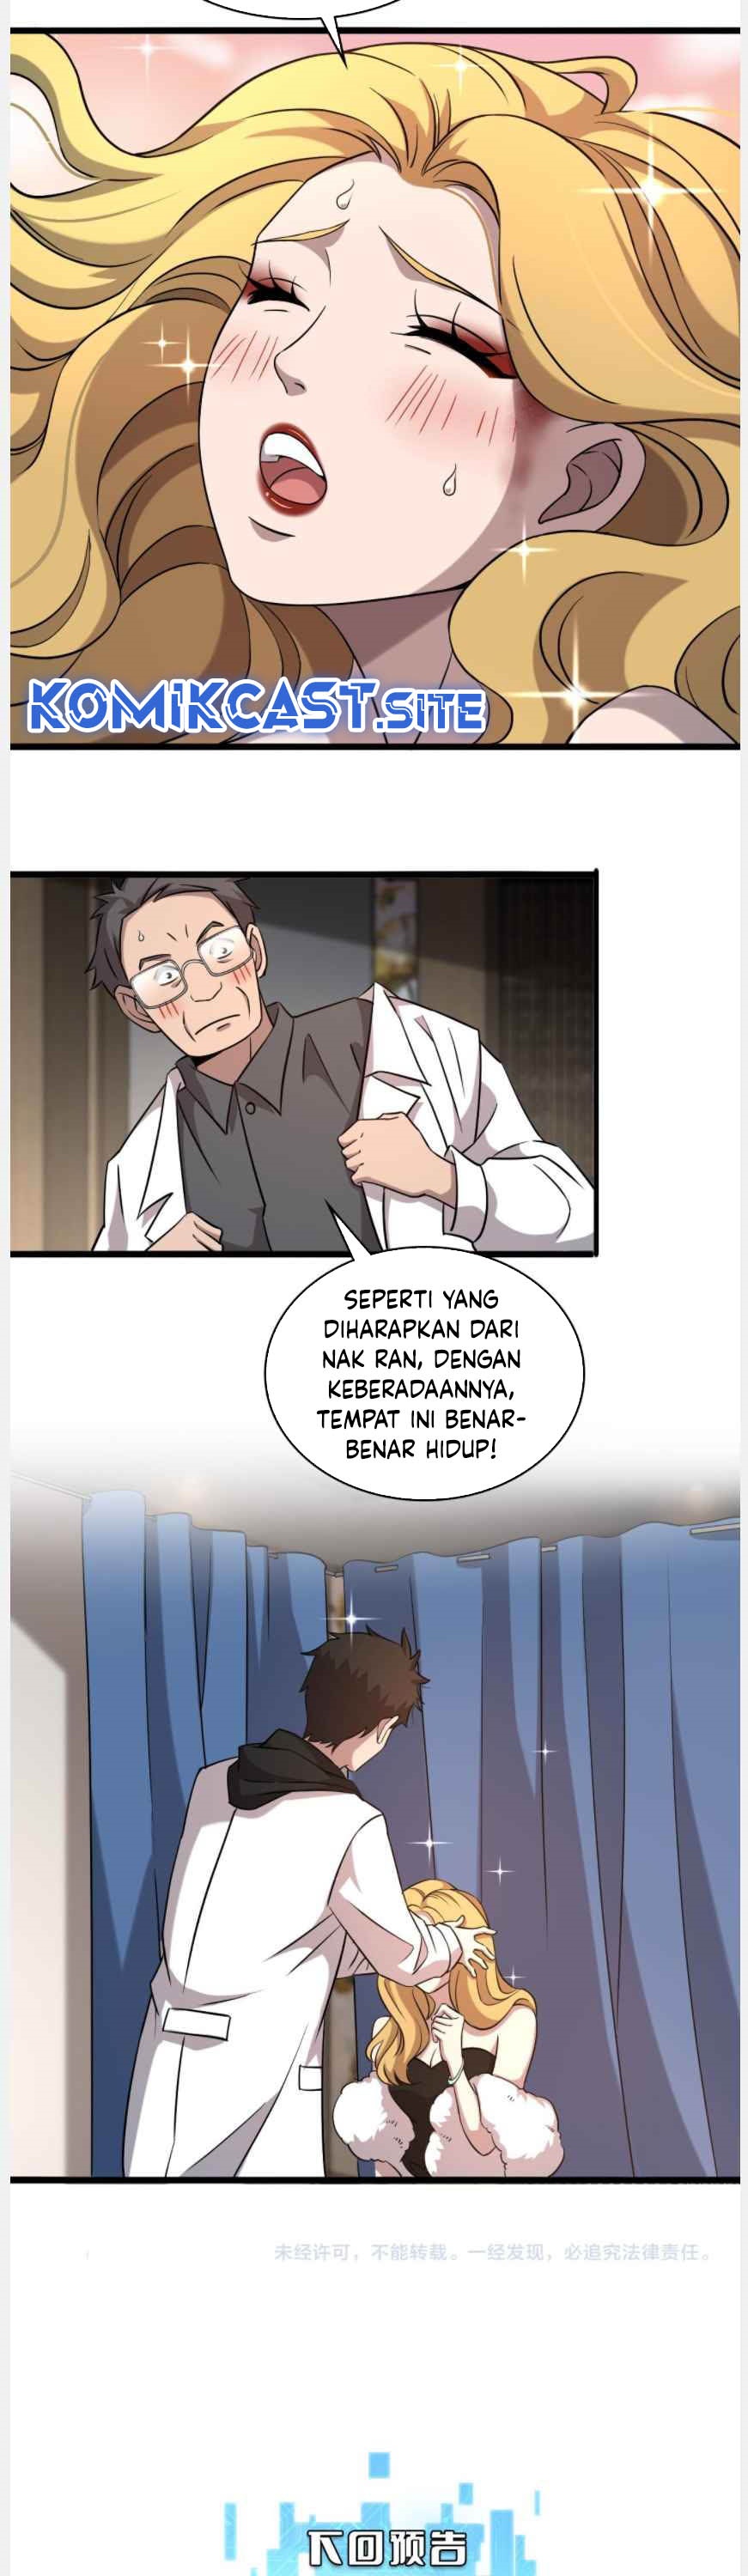 Great Doctor Ling Ran Chapter 96